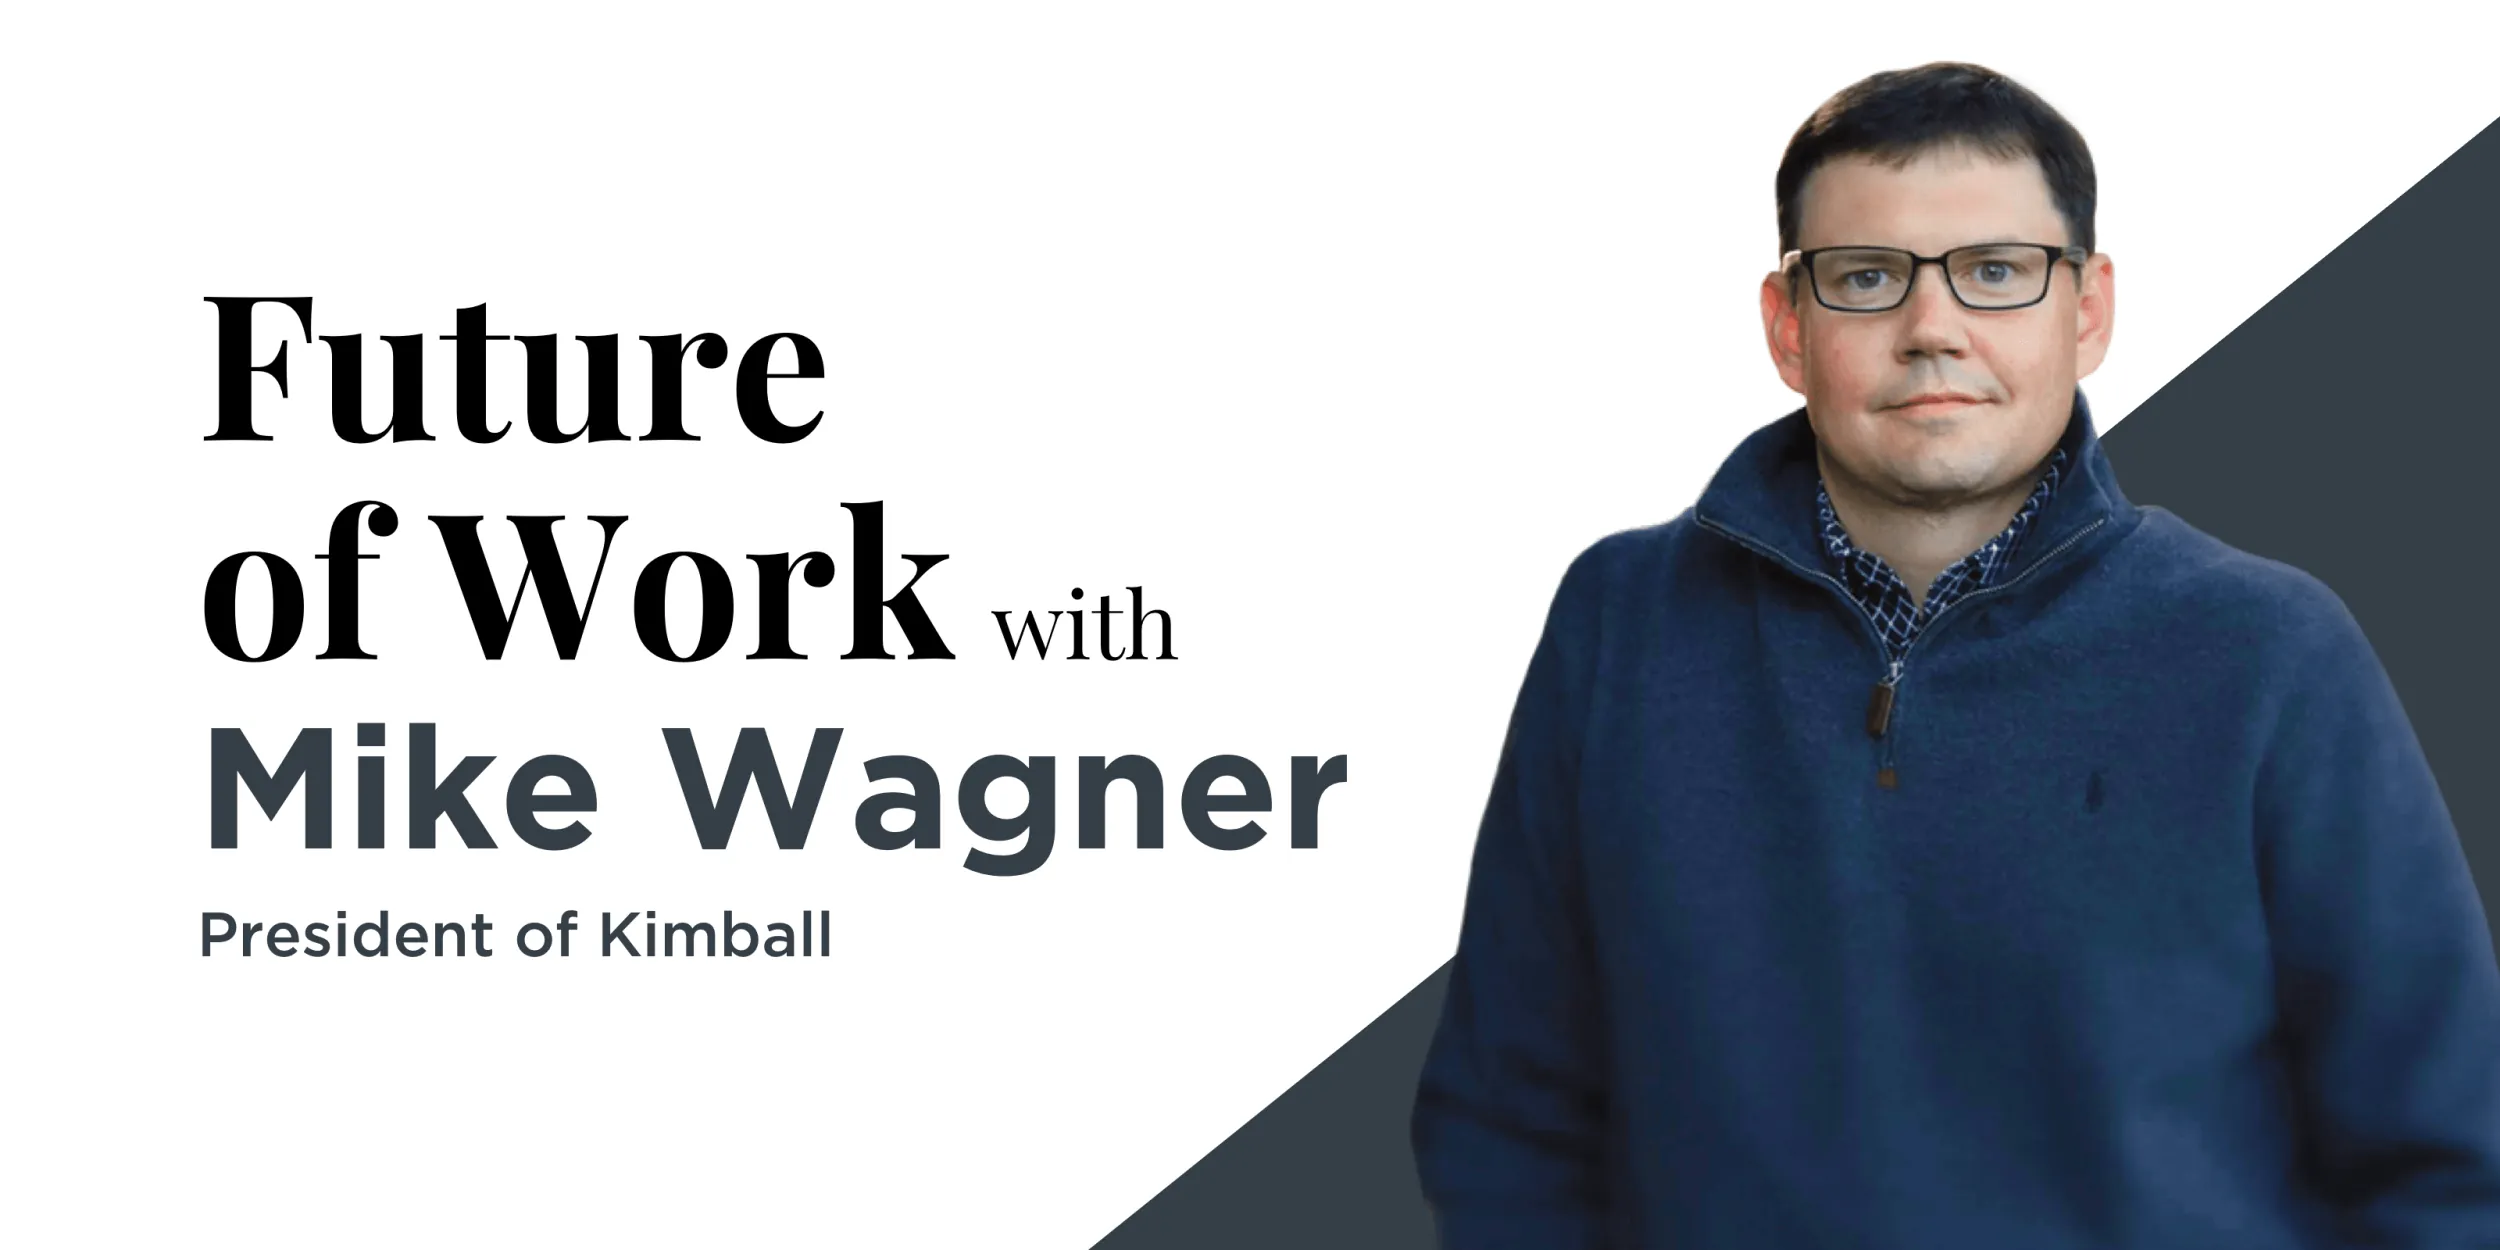 Future of Work with Mike Wagner